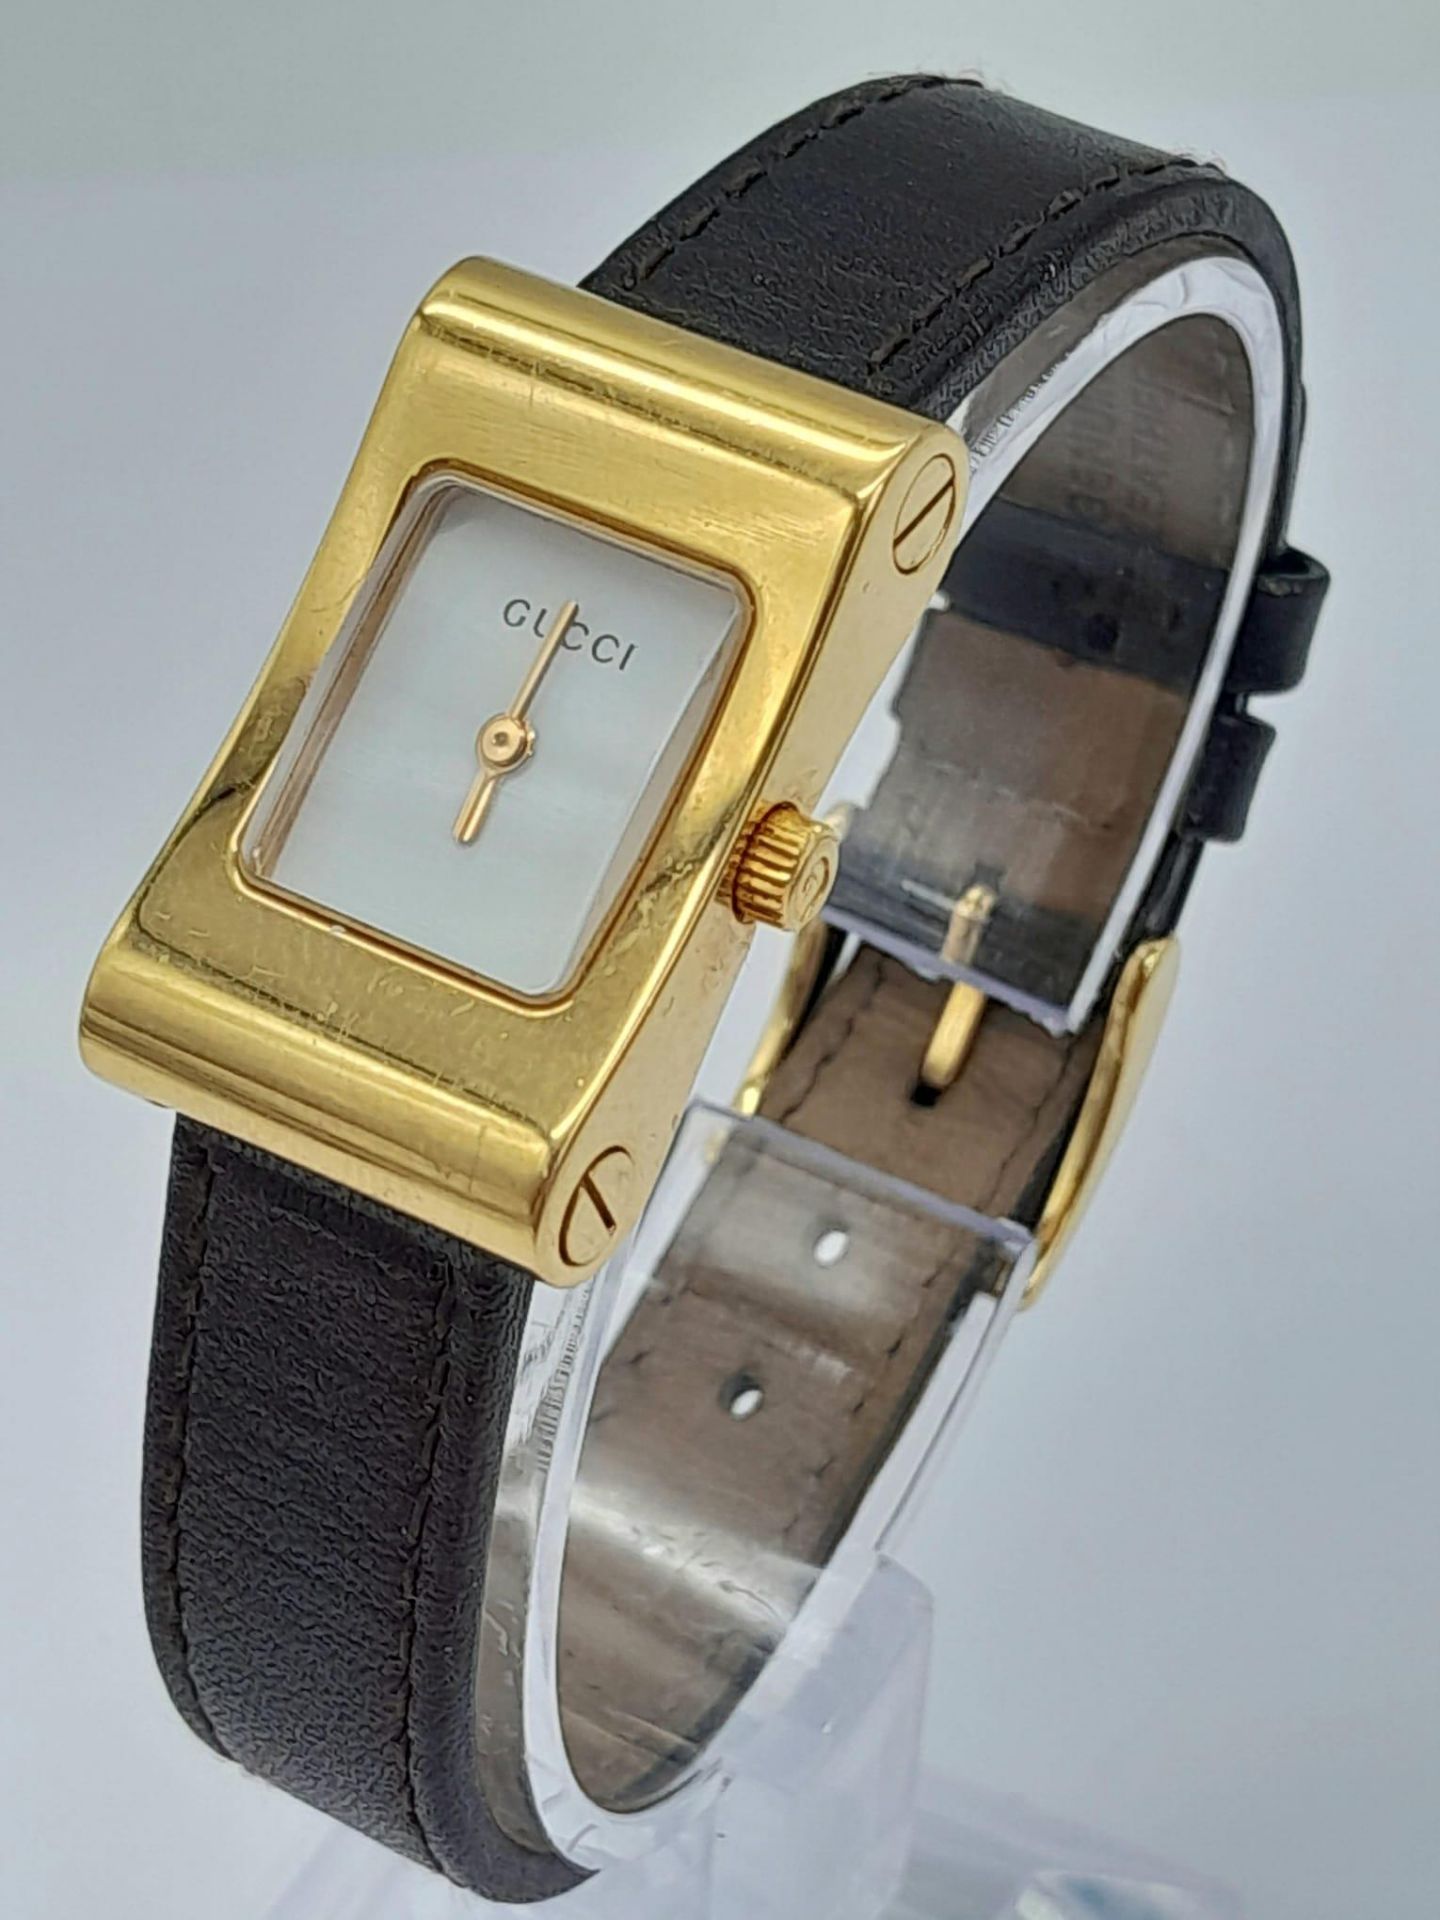 A Gucci 2300L Quartz Ladies Watch. Brown leather strap. Gilded case - 17mm. White dial. In need of a